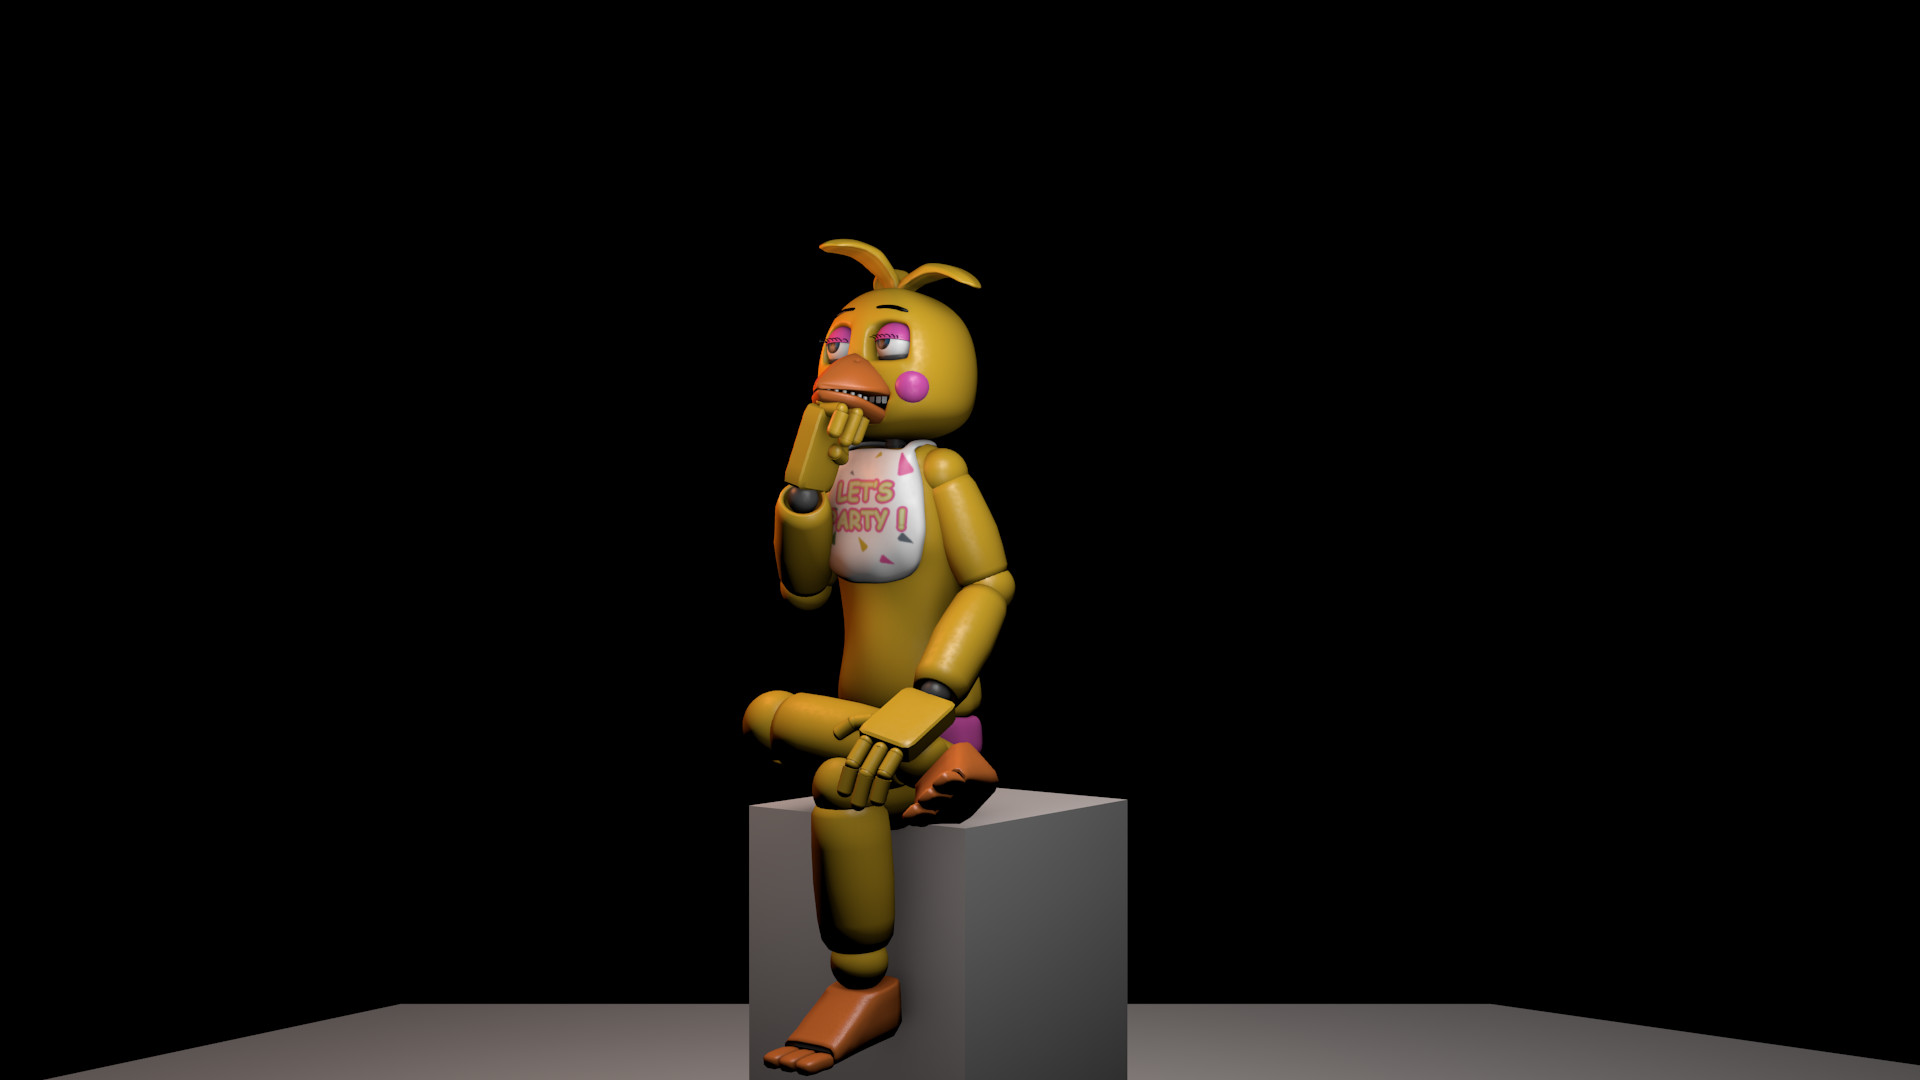 1920x1080 ... Toy Chica thinking about the meaning of the life by TheSpygineer